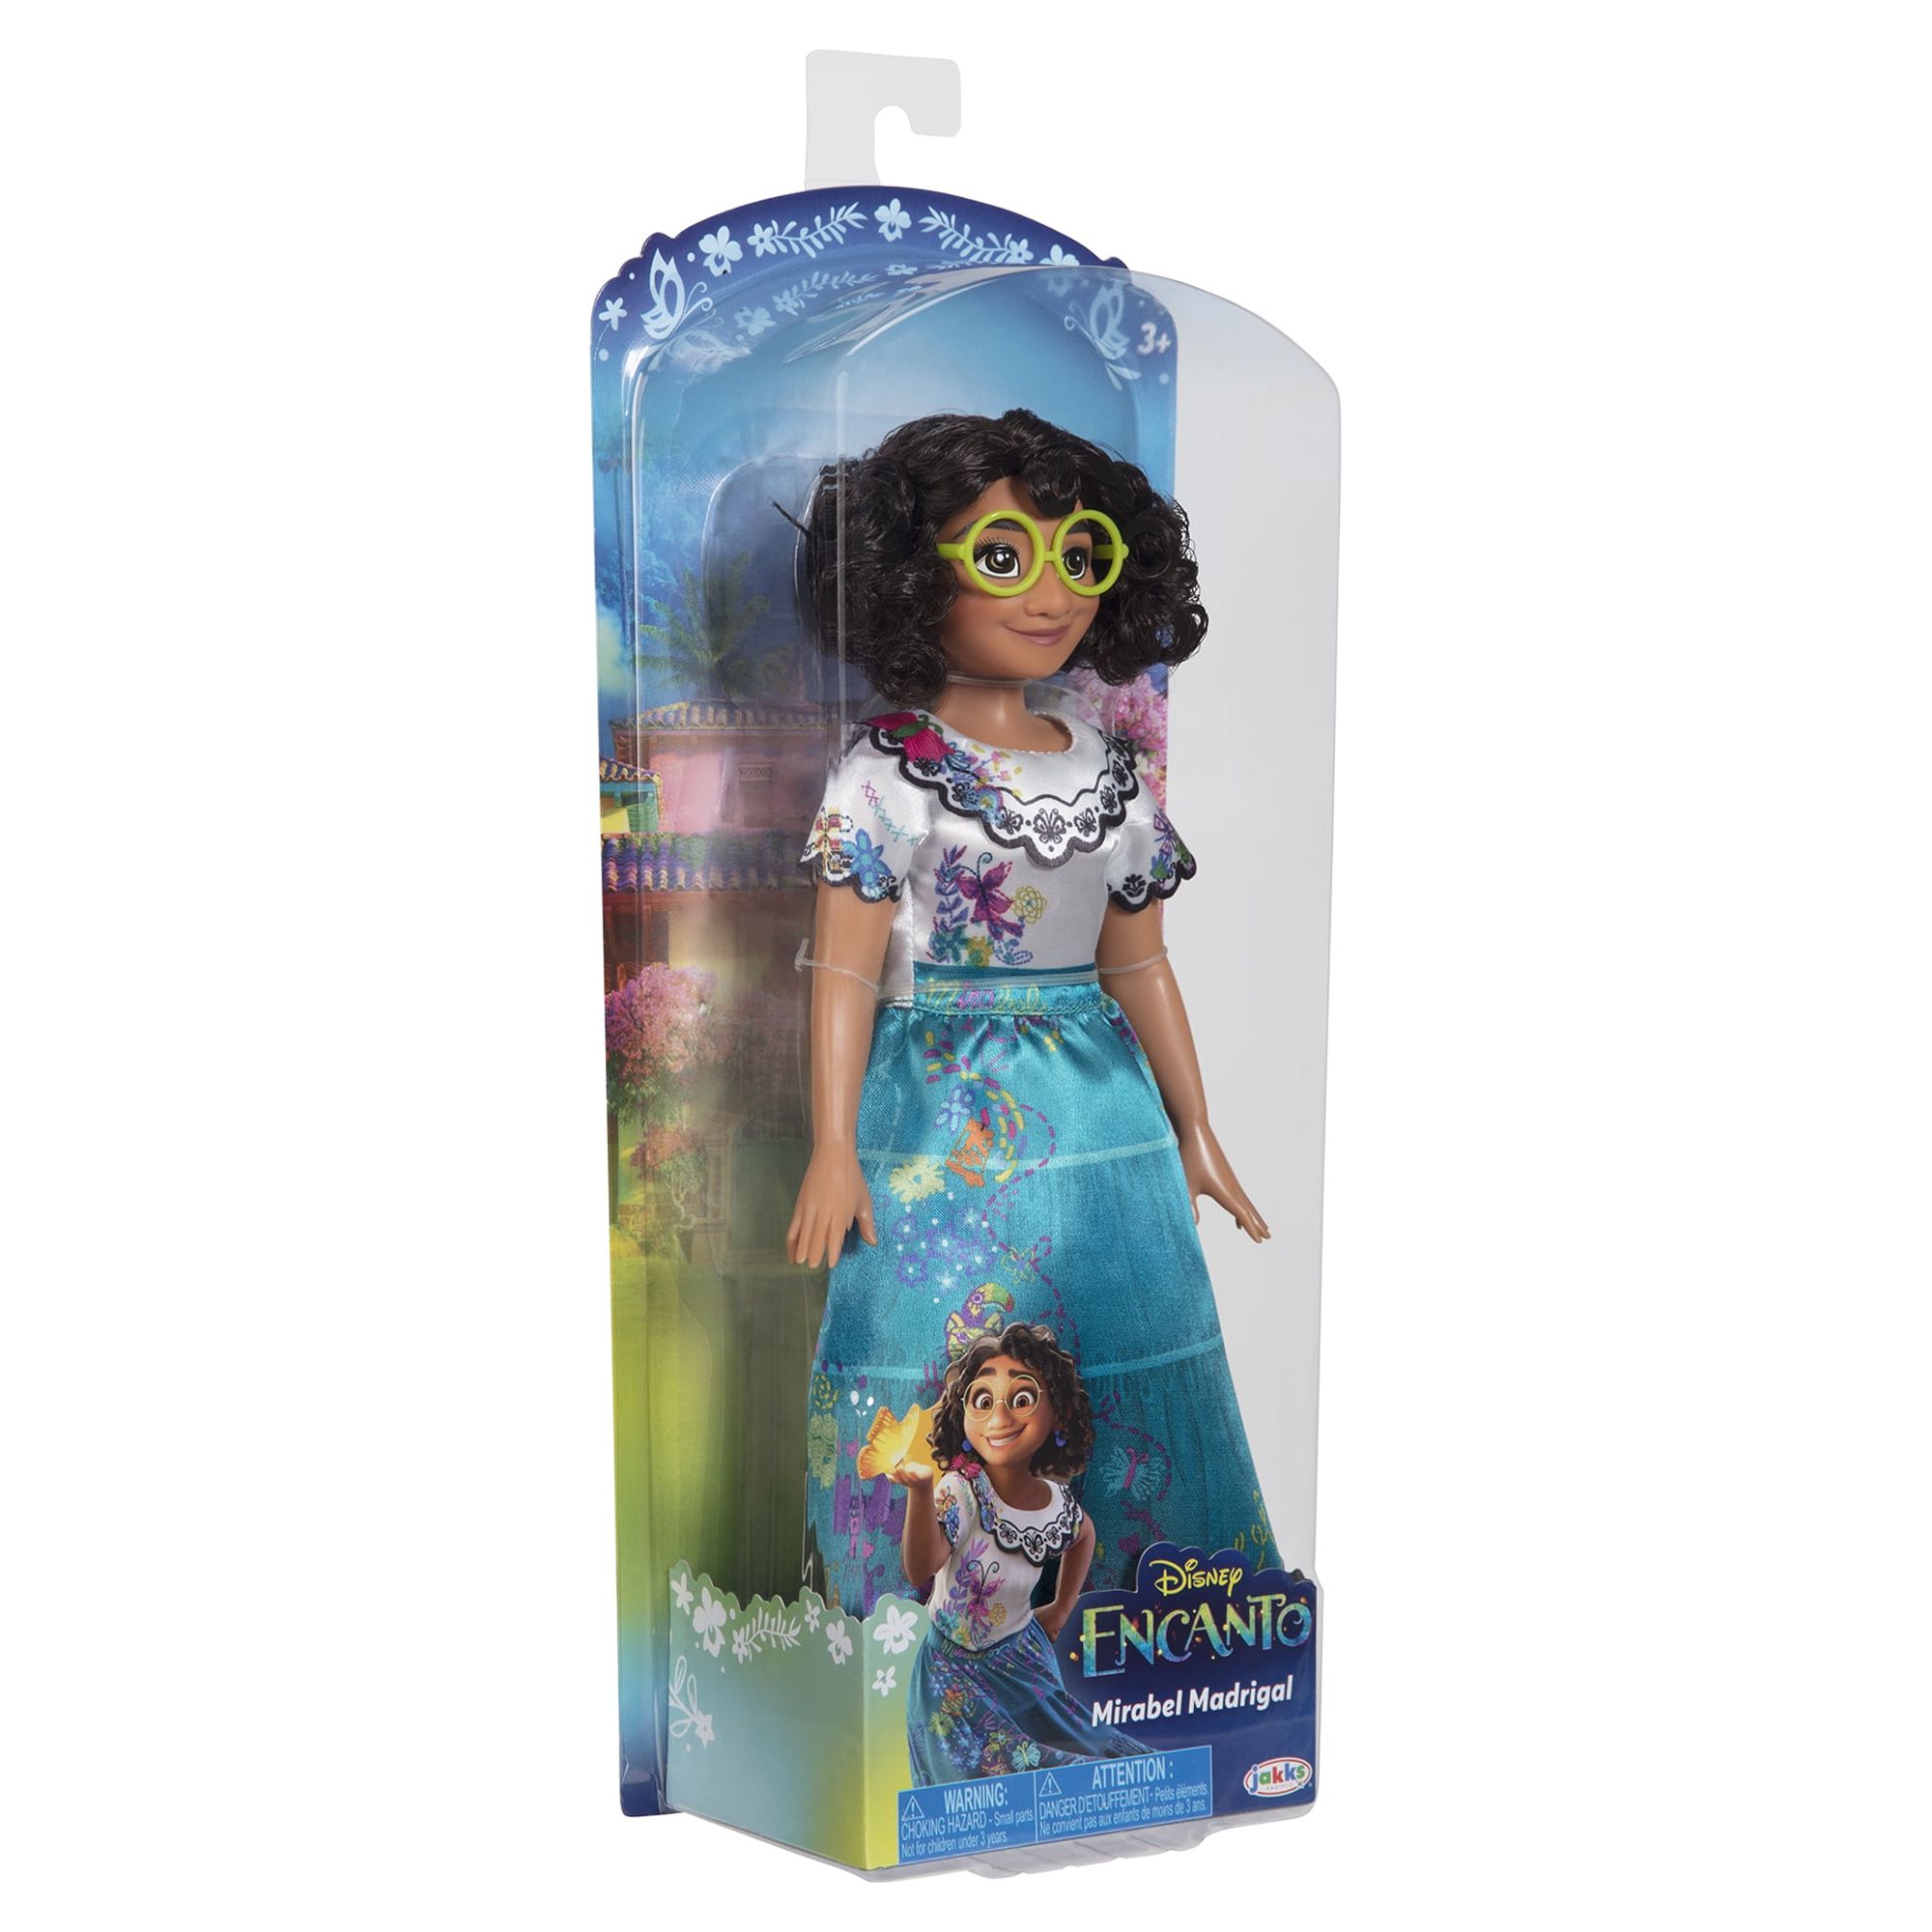 Disney Encanto Mirabel 11 inch Fashion Doll Includes Dress, Shoes and Clip, for Children Ages 3+ - image 5 of 6